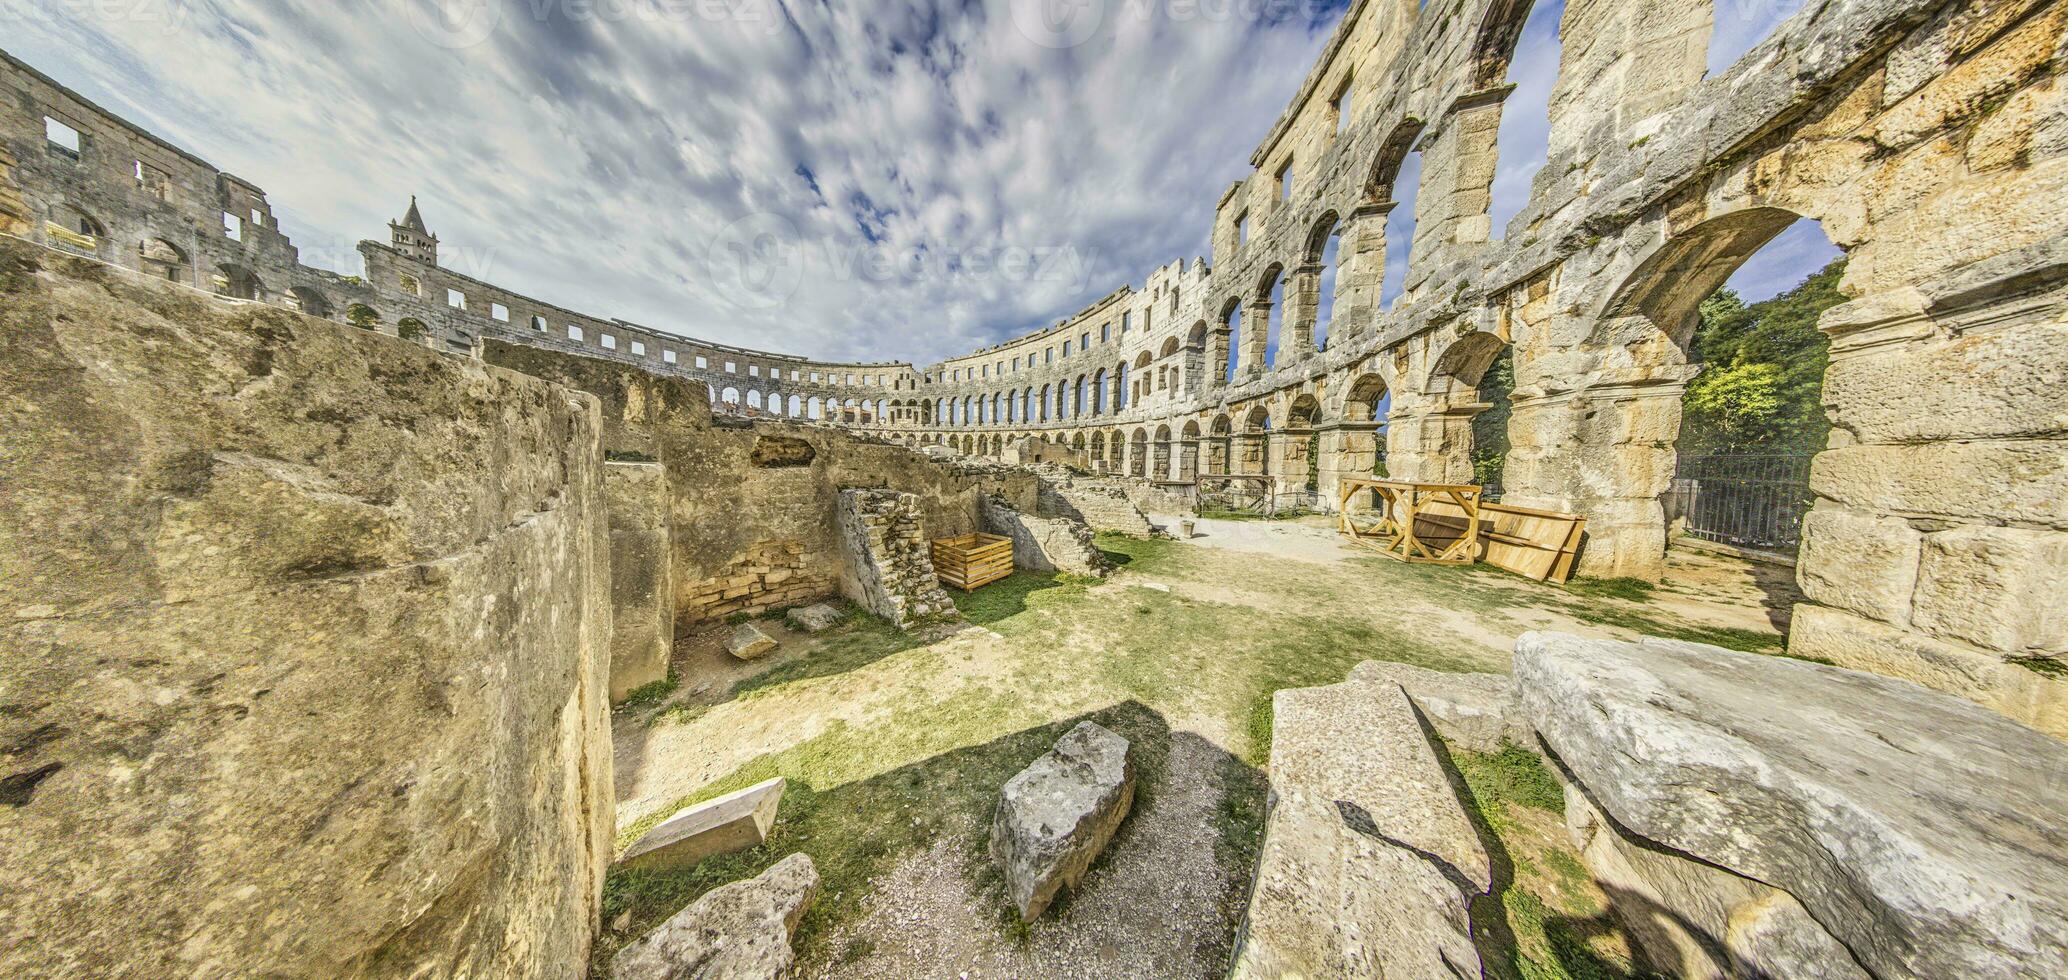 View inside the Roman amphitheater in the Croatian city of Pula without people photo